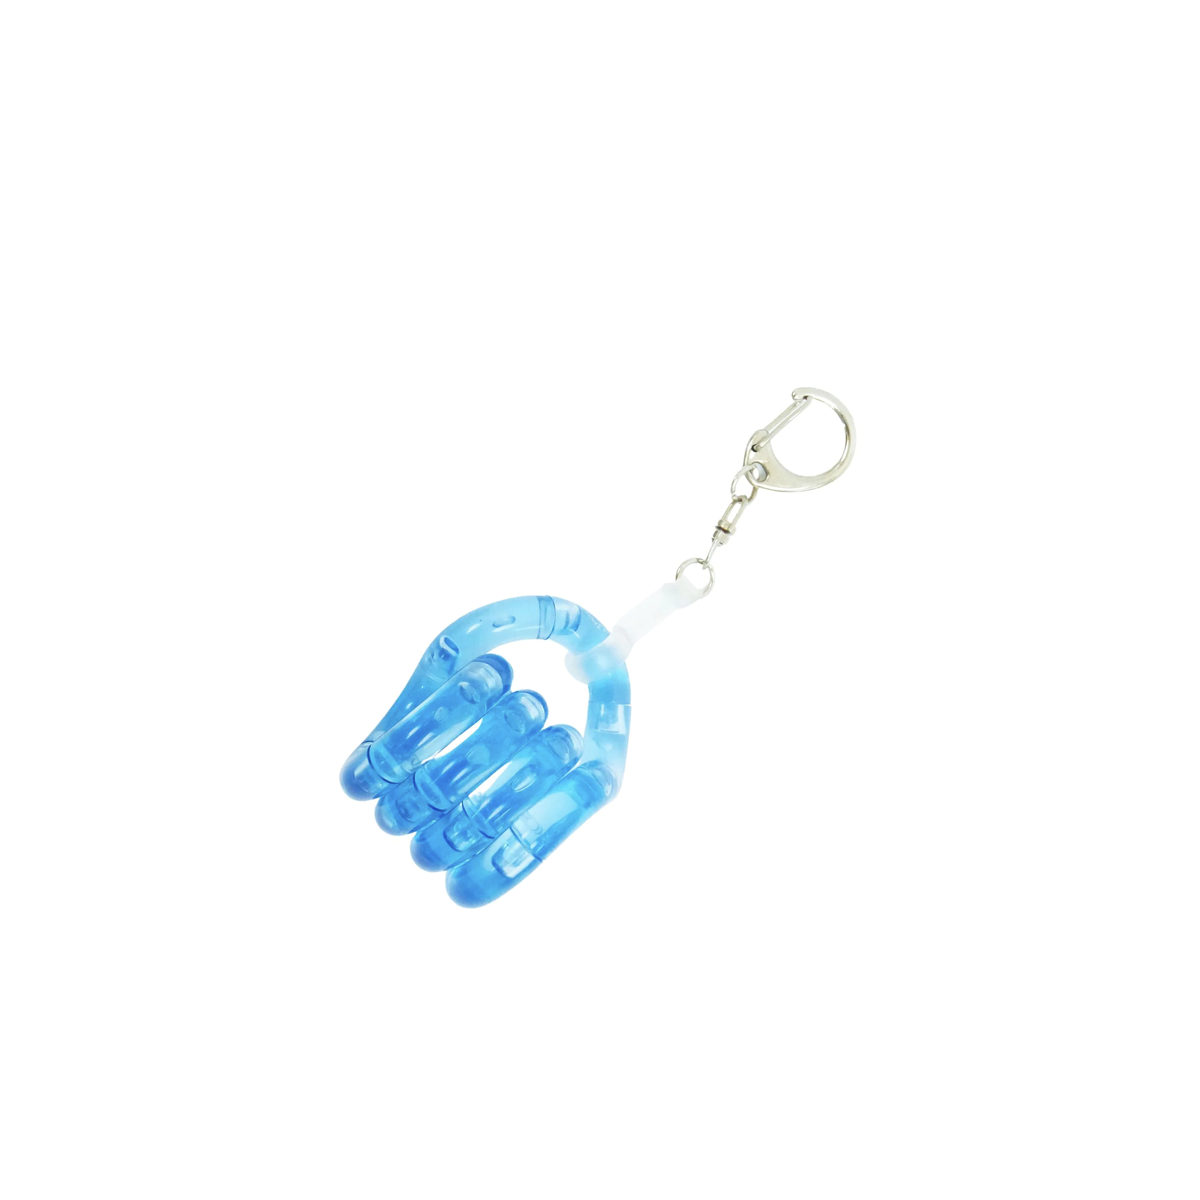 Tangle Toys Junior - Jelly Keychain Berries